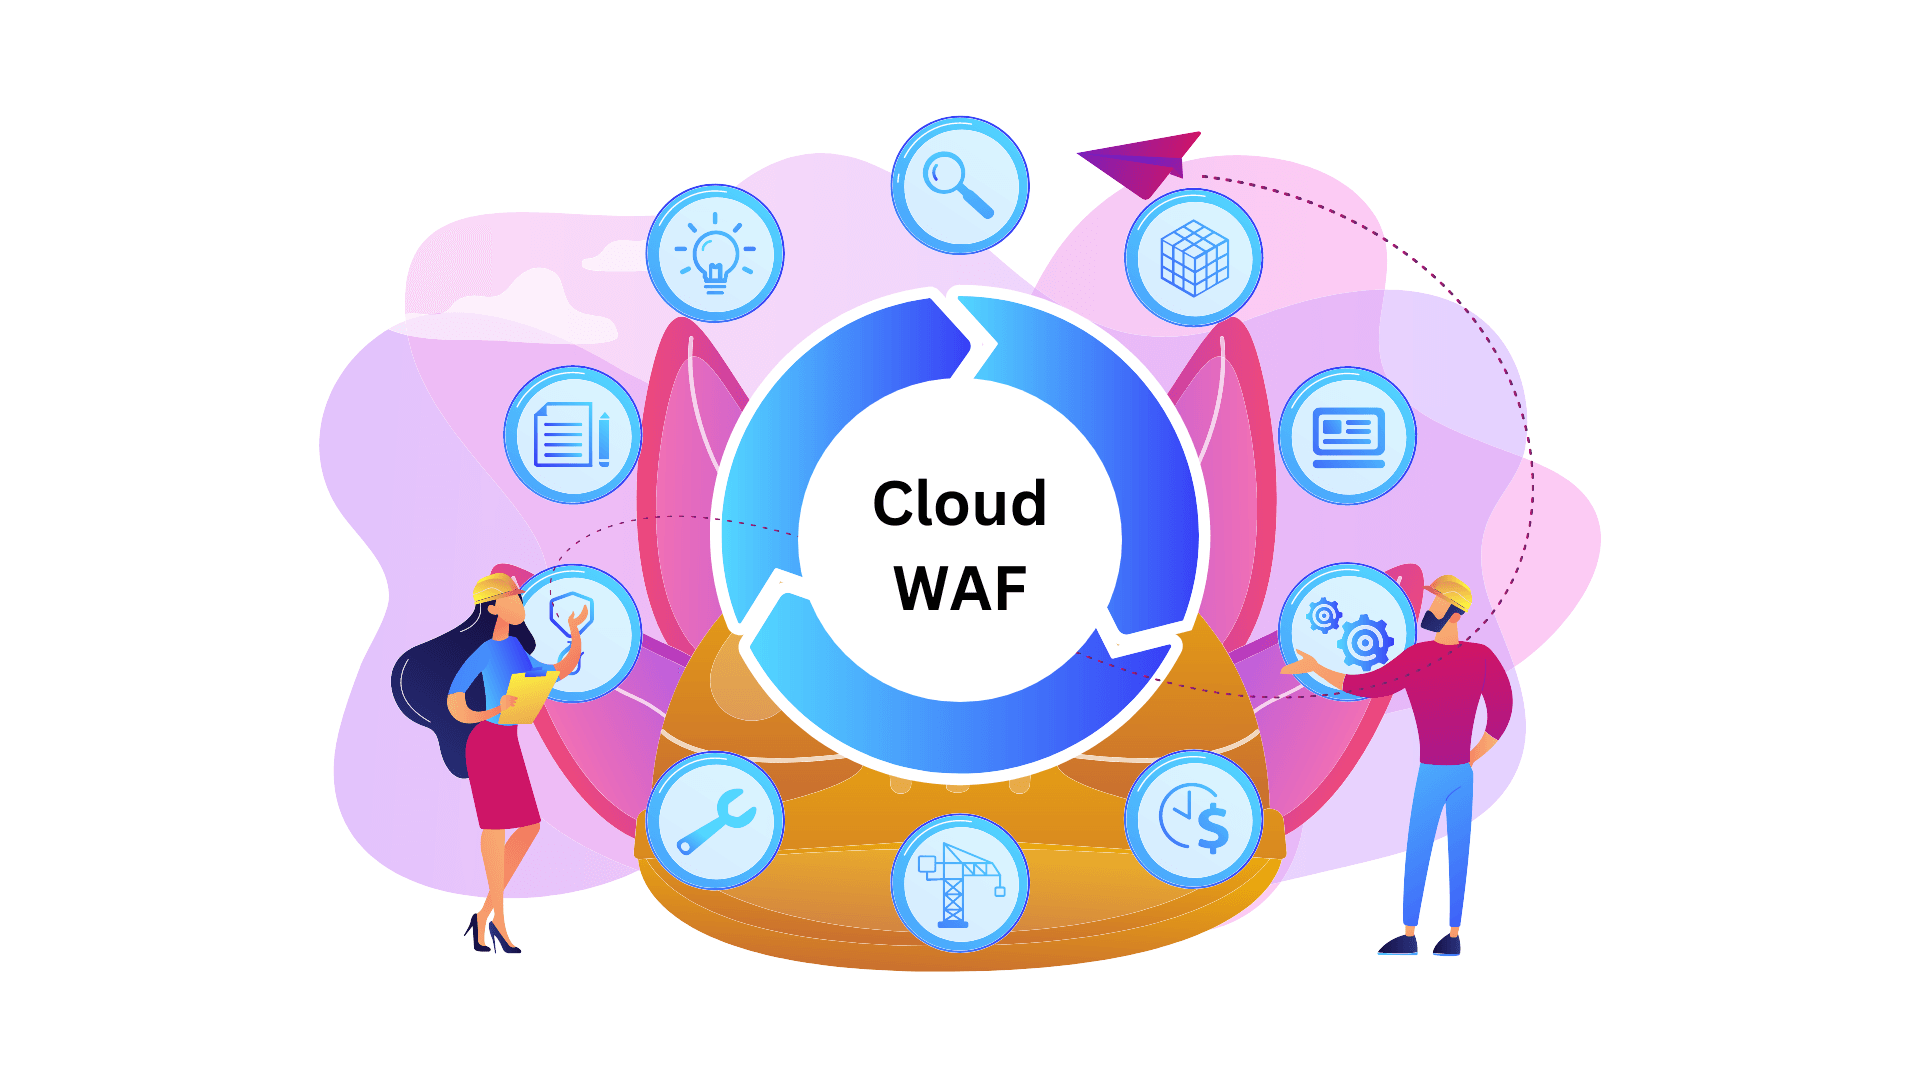 2. Advantages of Cloud WAF compared to other security solutions